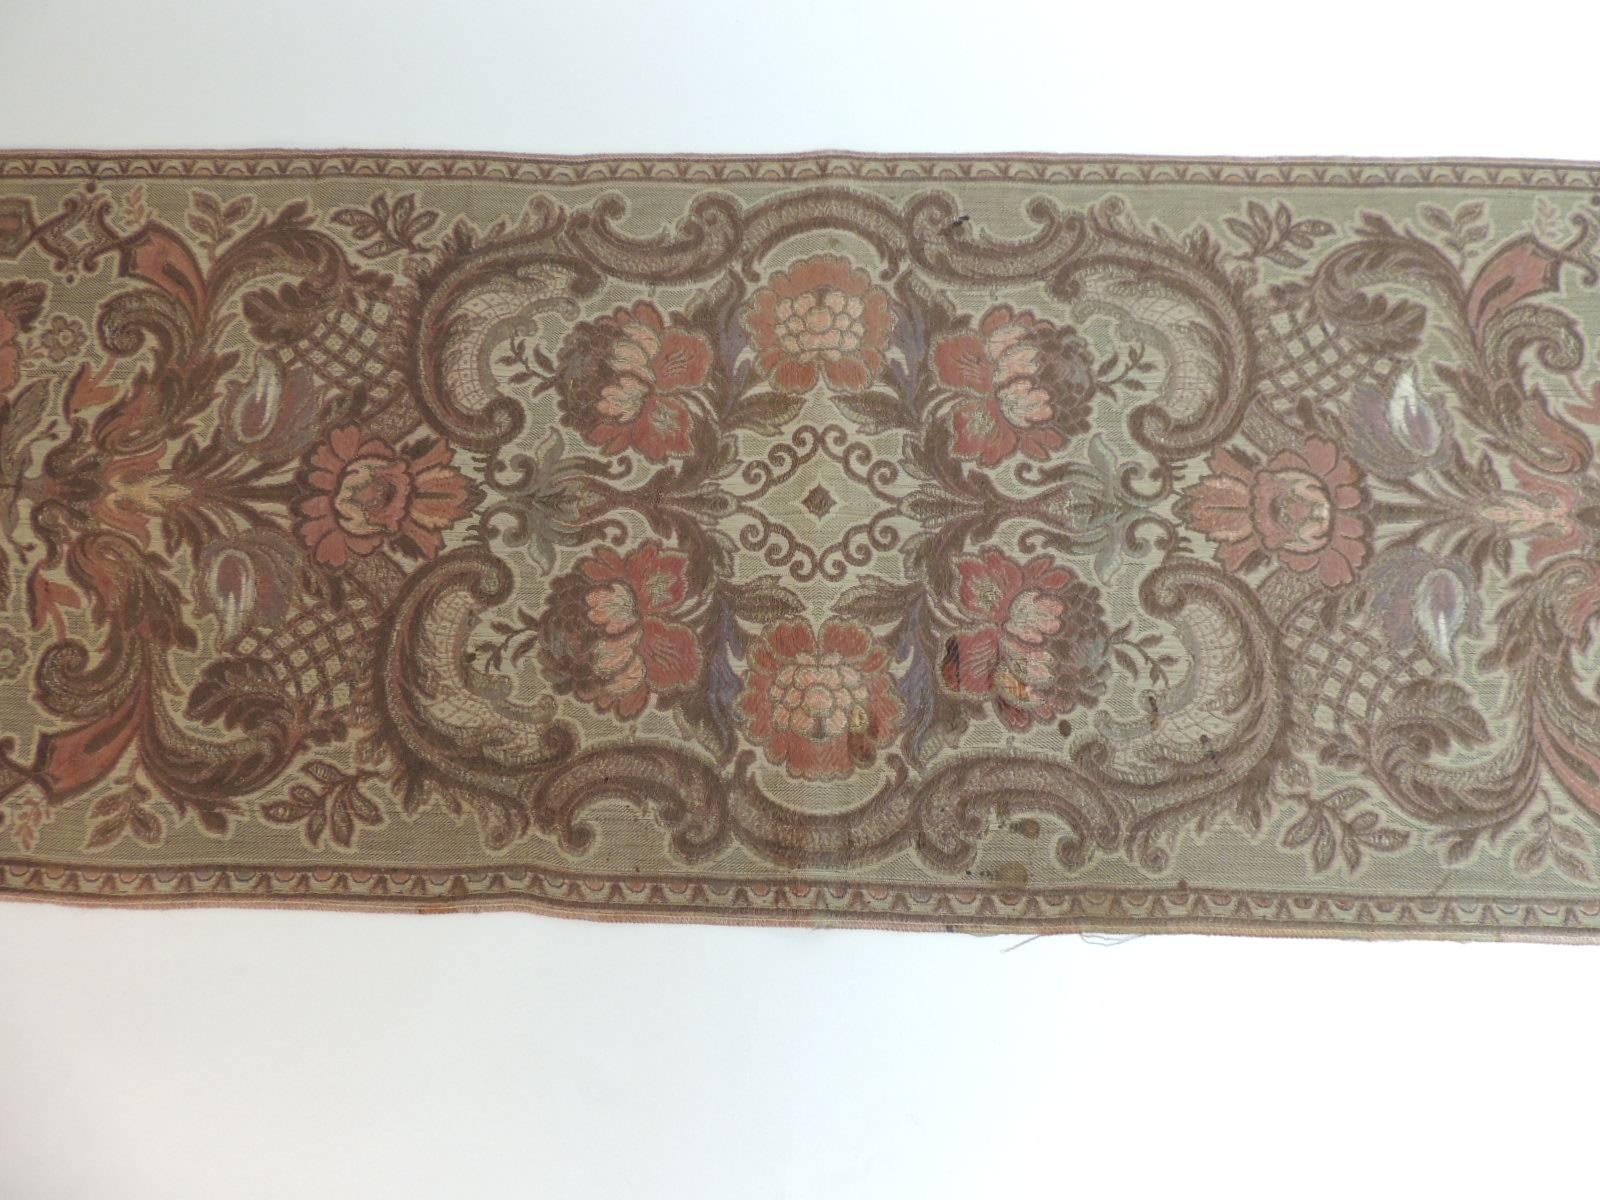 Baroque Revival CLOSE OUT SALE: 19th Century, Table Runner Embroidered with Metallic Threads 